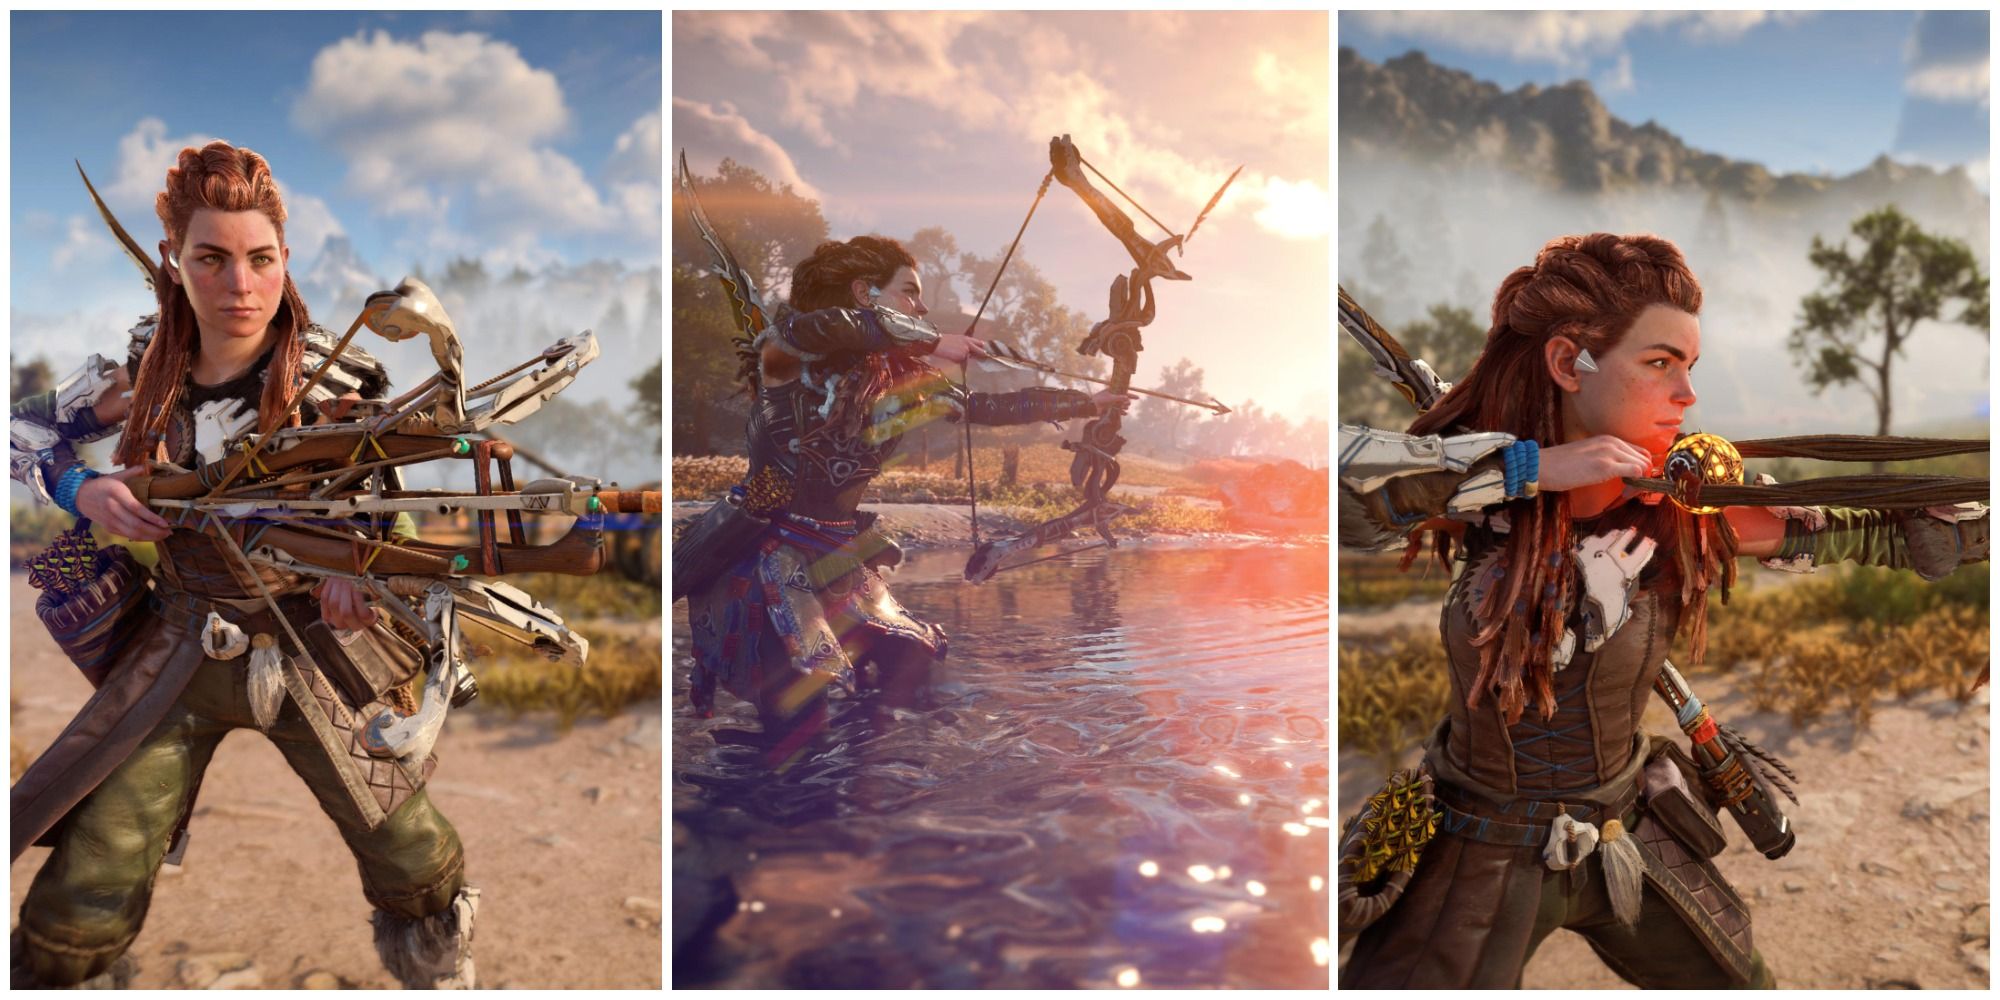 Horizon Forbidden West: Best Coils to Use in Weapons